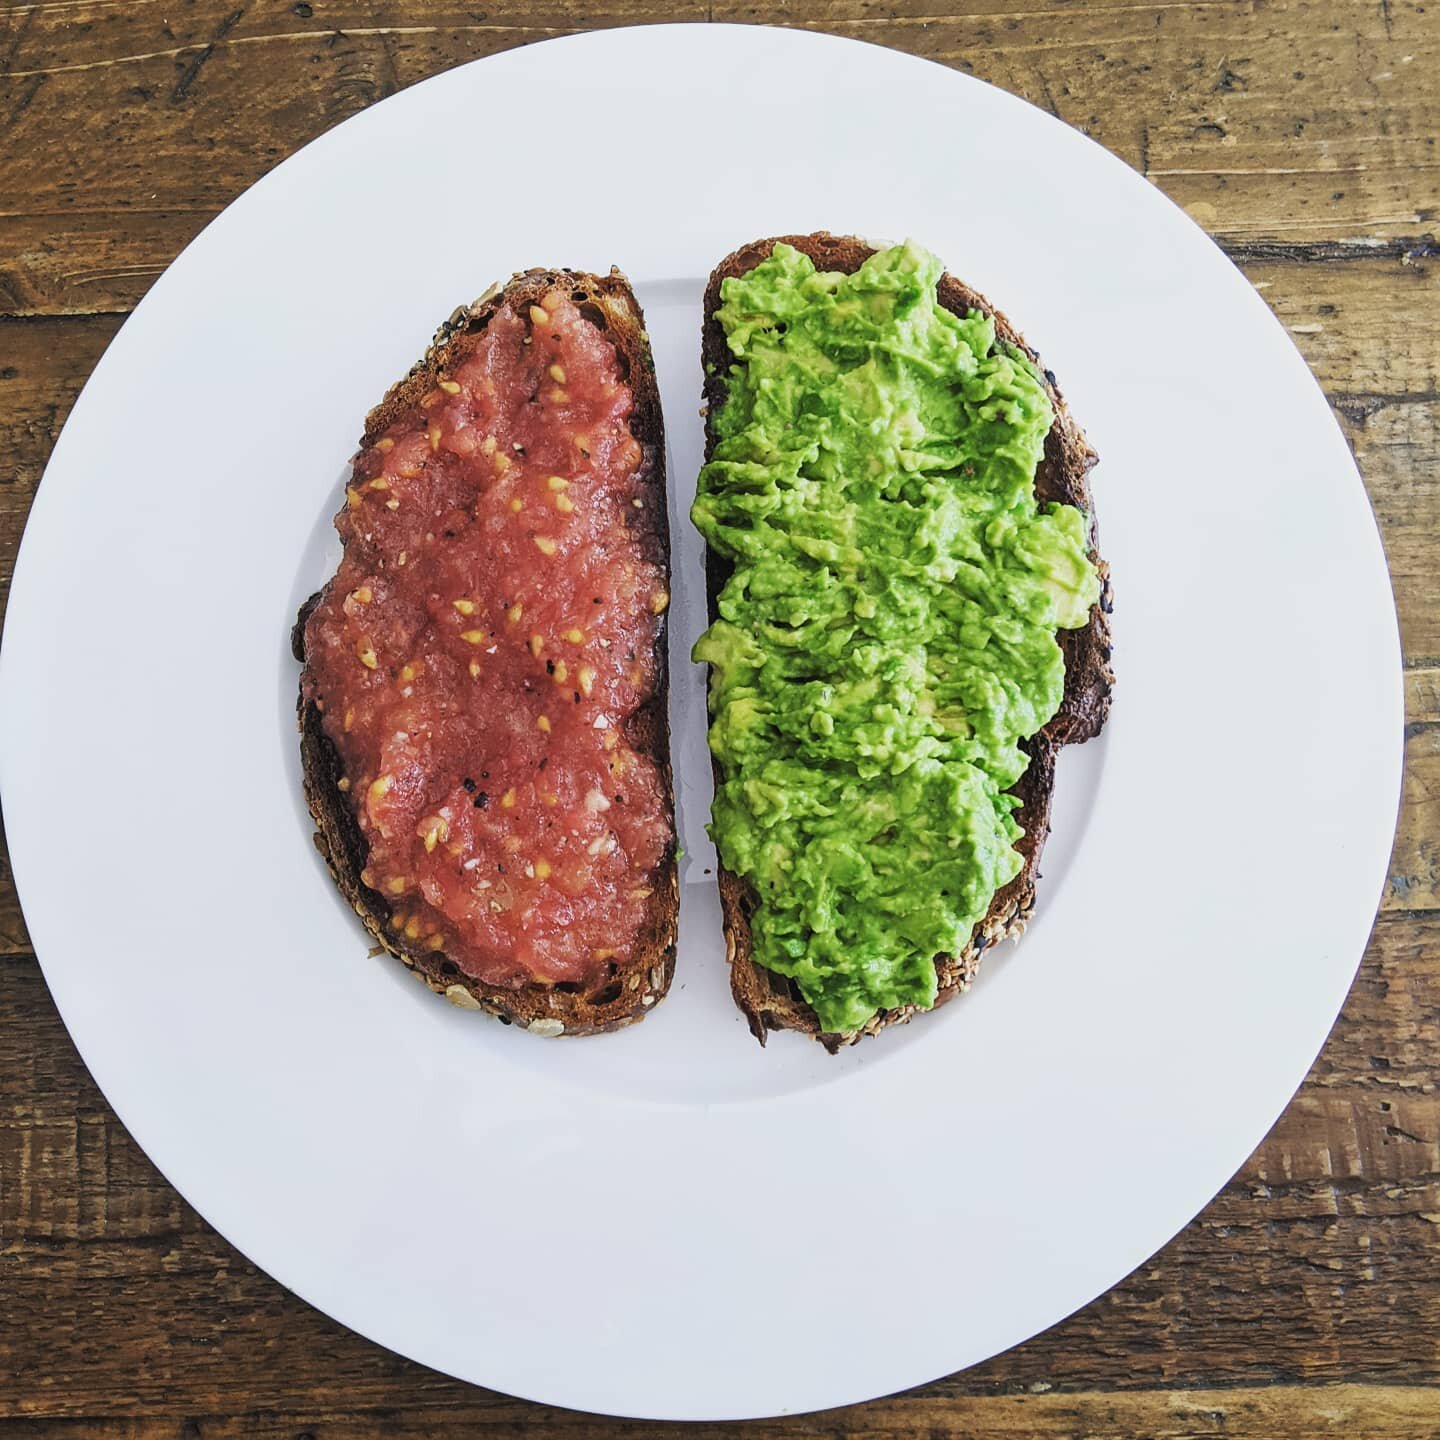 Tomato toast &amp; Avocado toast on @brodflour
Bird Seed Loaf, hard toasted to stand up to the liquid of the tomato toast.

Tomato toast:
3 tomatoes, scored, blanched, peeled &amp; grated
1 clove of garlic, microplaned
Olive oil
Salt &amp; Pepper

Av